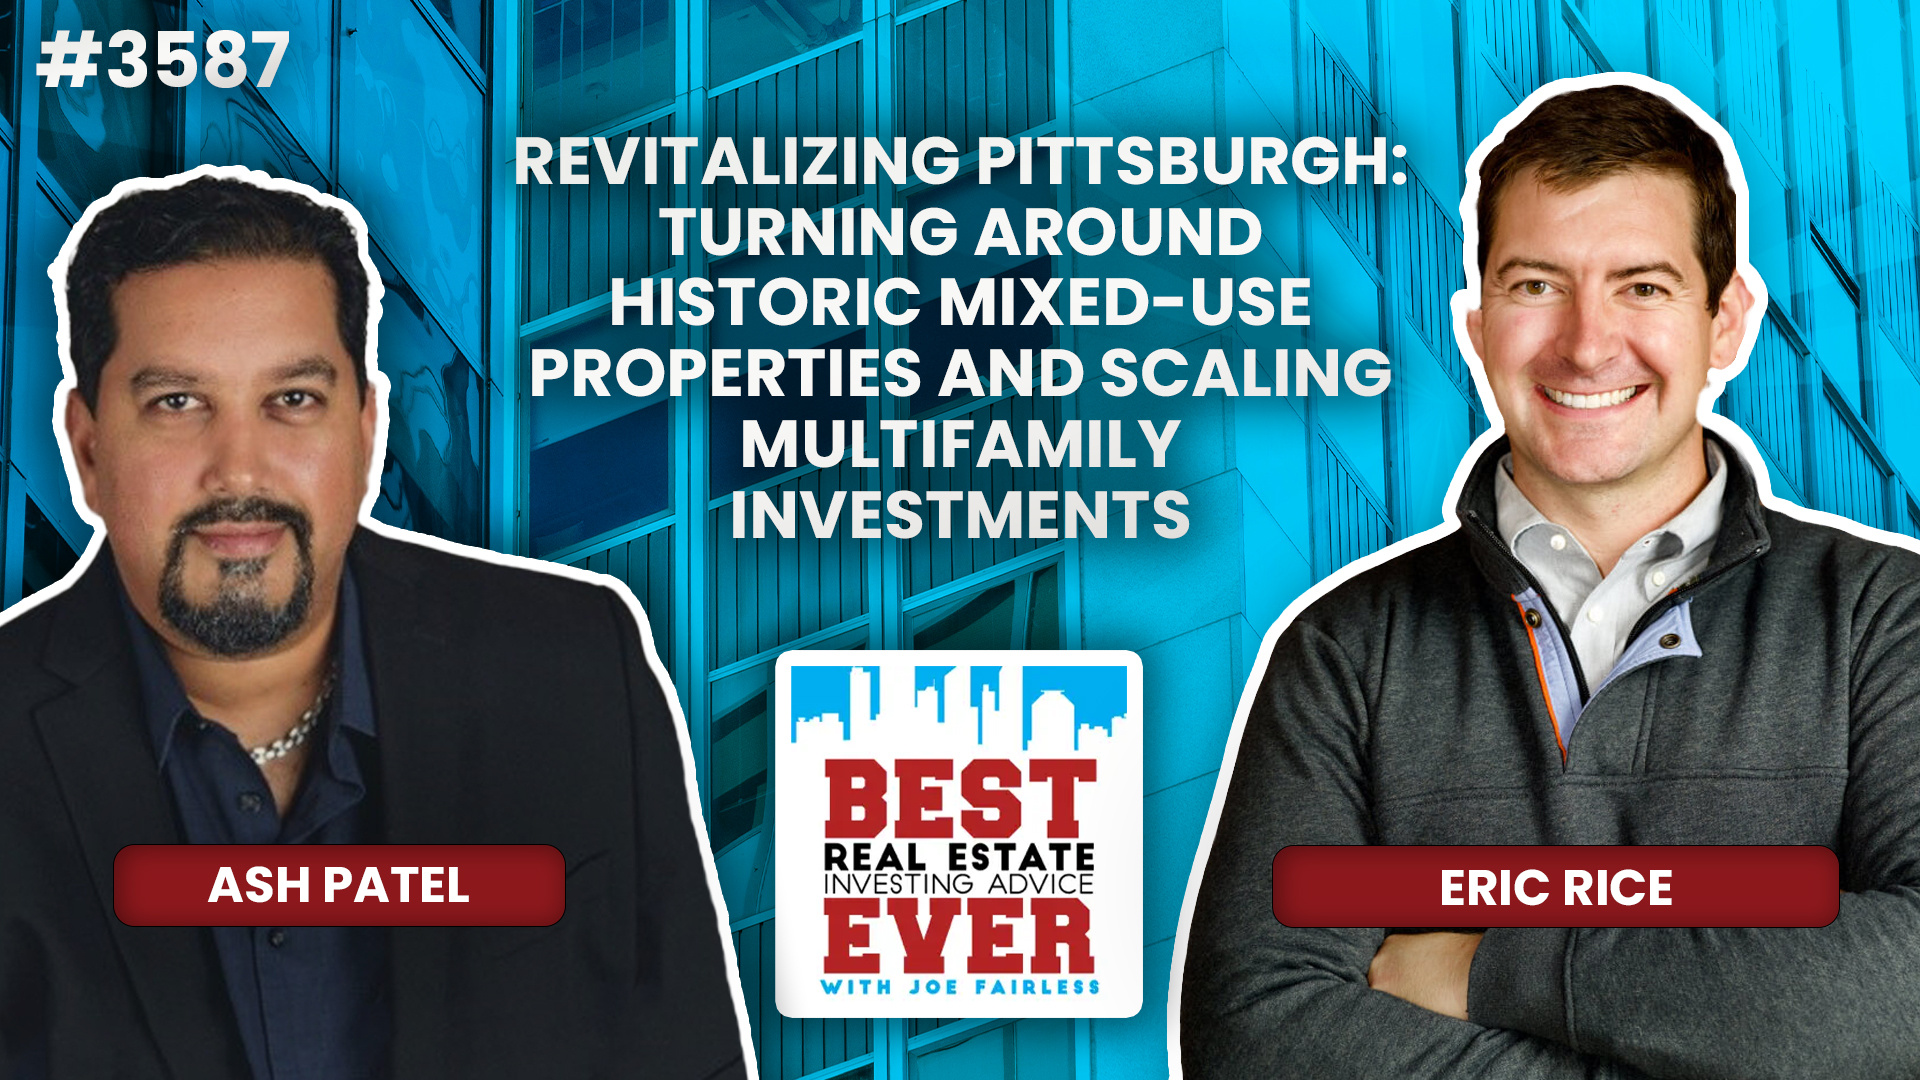 JF3587: Revitalizing Pittsburgh: Turning Around Historic Mixed-Use Properties and Scaling Multifamily Investments ft. Eric Rice